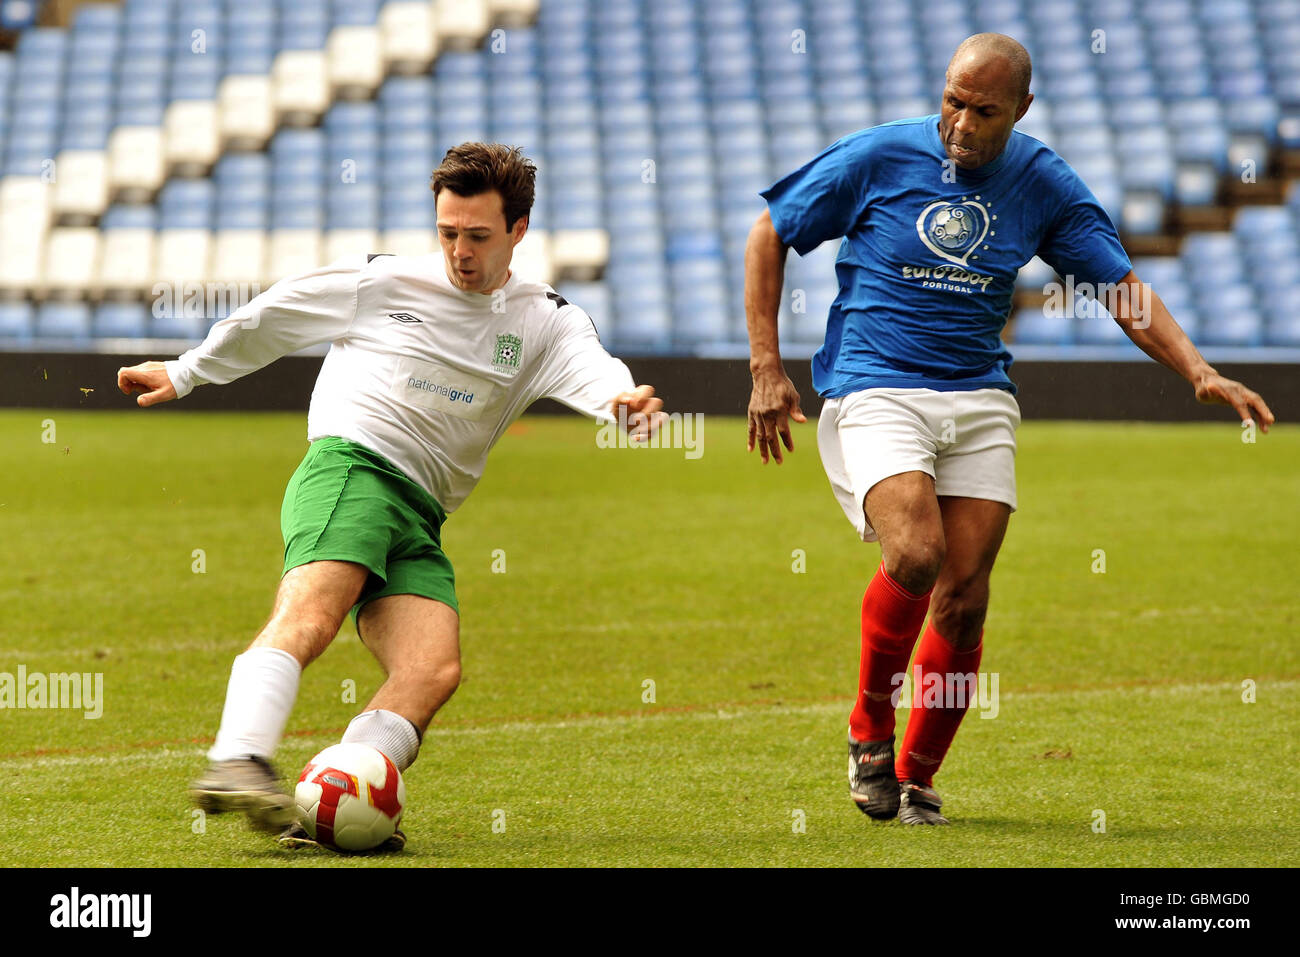 Andy Burnham (left) the Secretary of State for Culture, Media & Sport, in action against ex-pro Luther Blissett for the UK Parliamentary Football team vs. a celebrity sporting team, at Stamford Bridge, this morning. Stock Photo